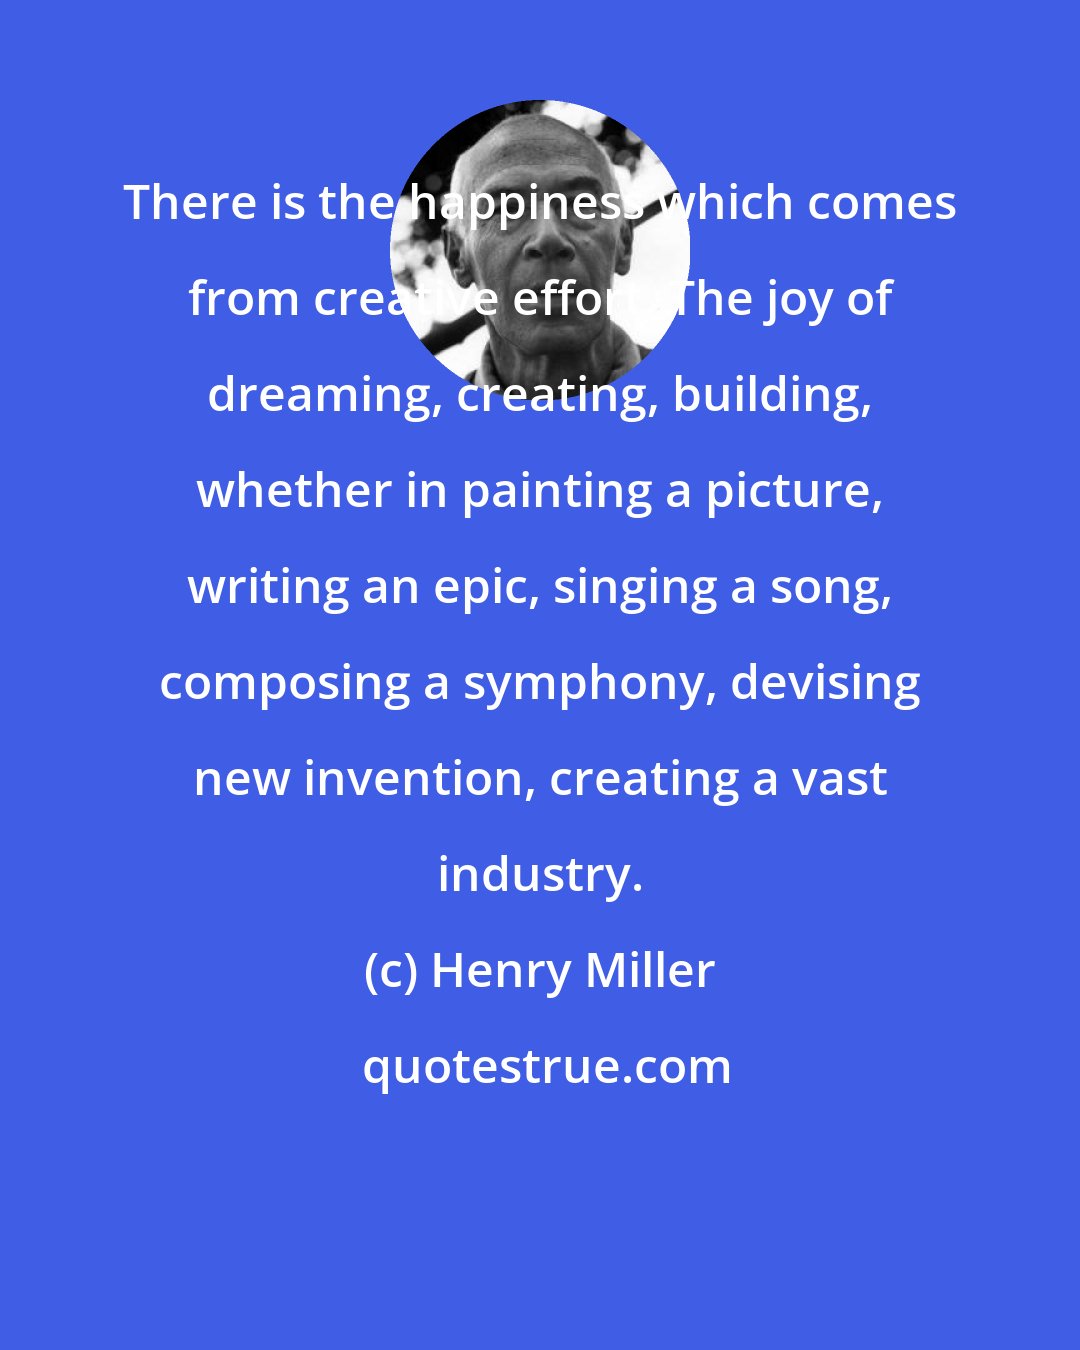 Henry Miller: There is the happiness which comes from creative effort. The joy of dreaming, creating, building, whether in painting a picture, writing an epic, singing a song, composing a symphony, devising new invention, creating a vast industry.